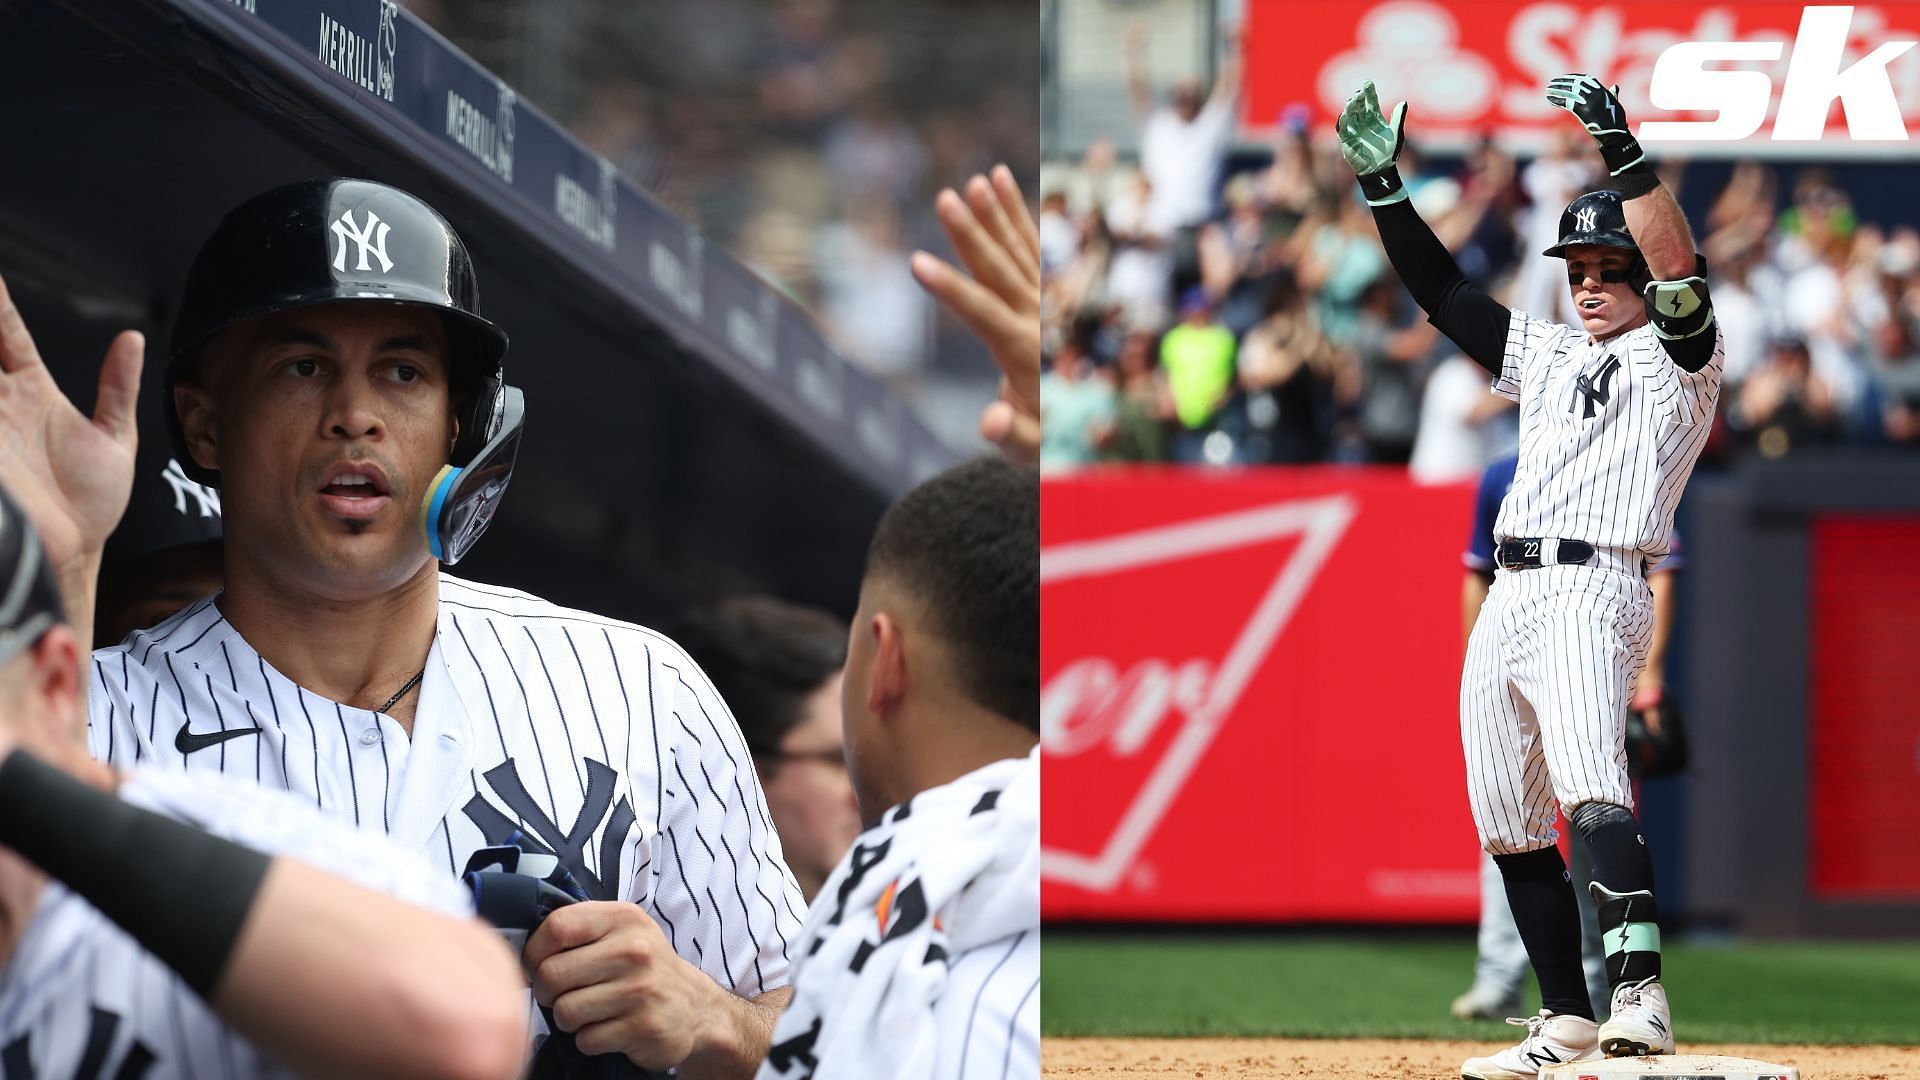 Harrison Bader and Giancarlo Stanton came up big for the New York Yankees on Sunday